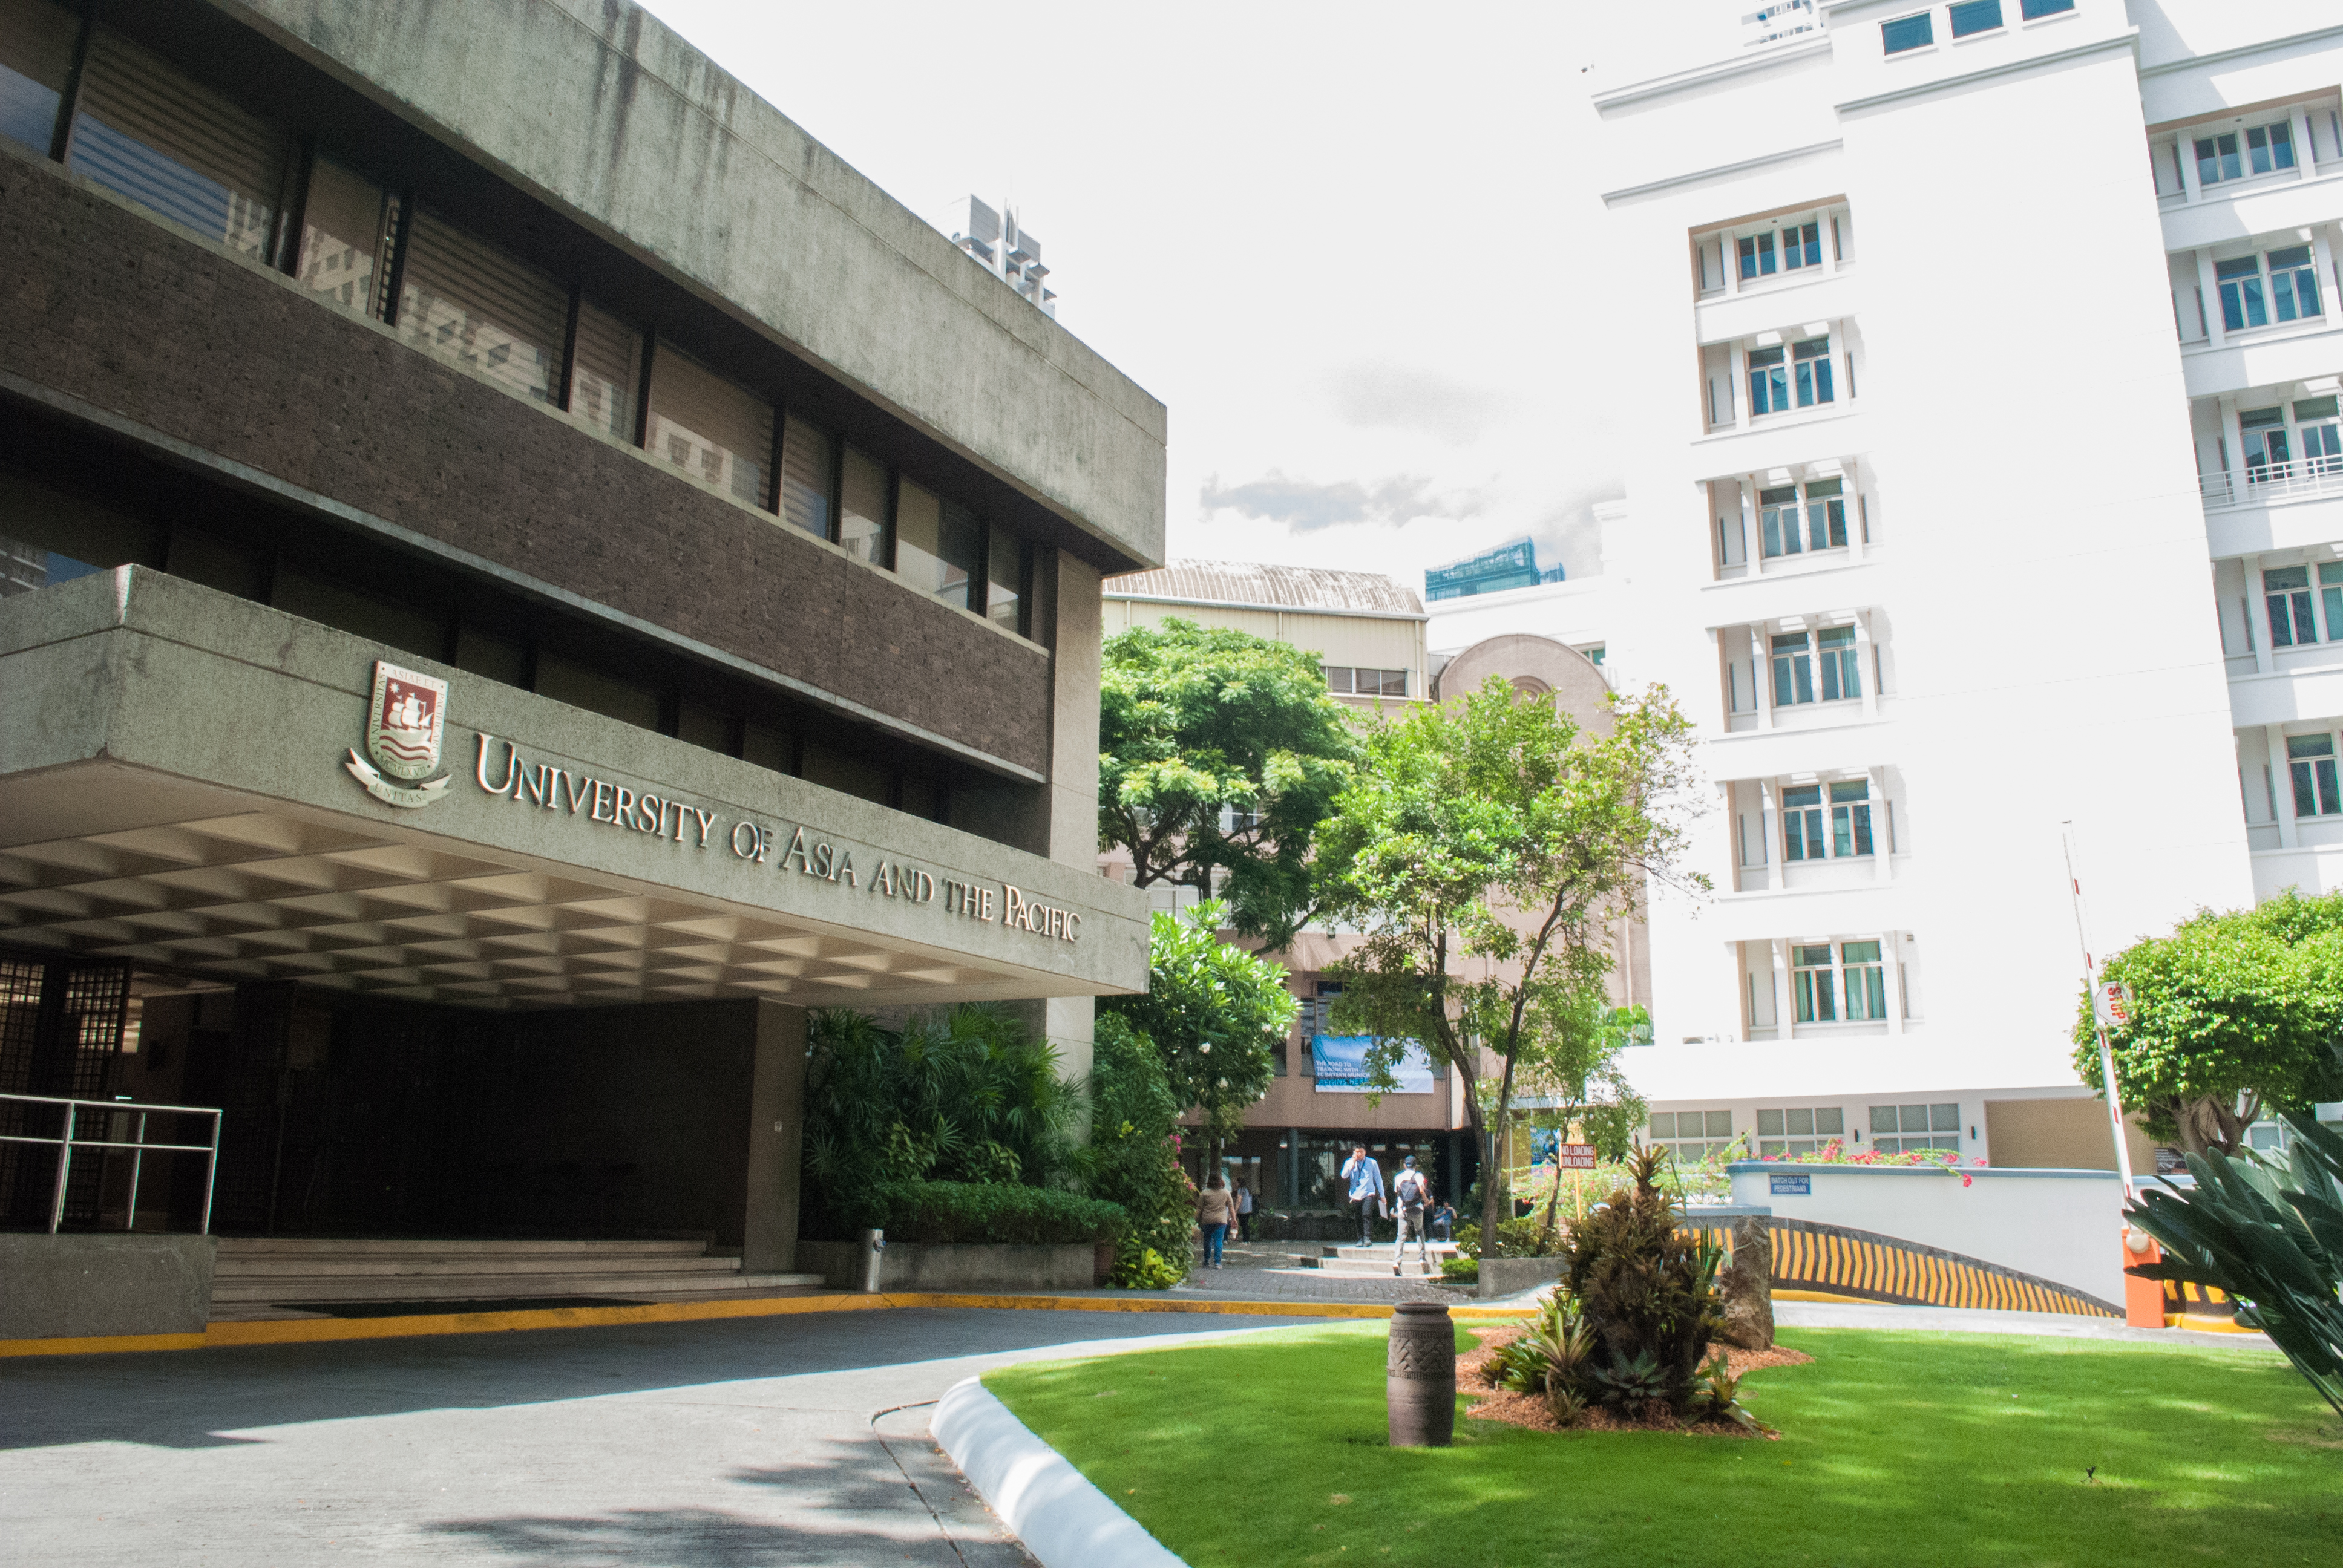 UNIVERSITY OF ASIA AND THE PACIFIC